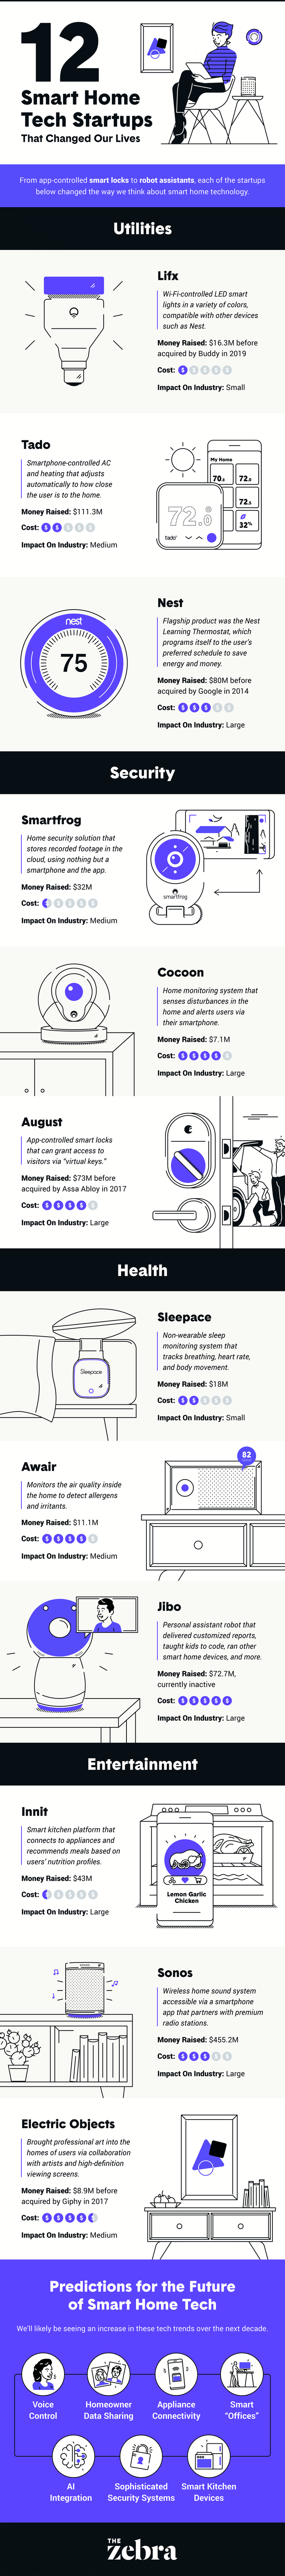 smart home technology infographic